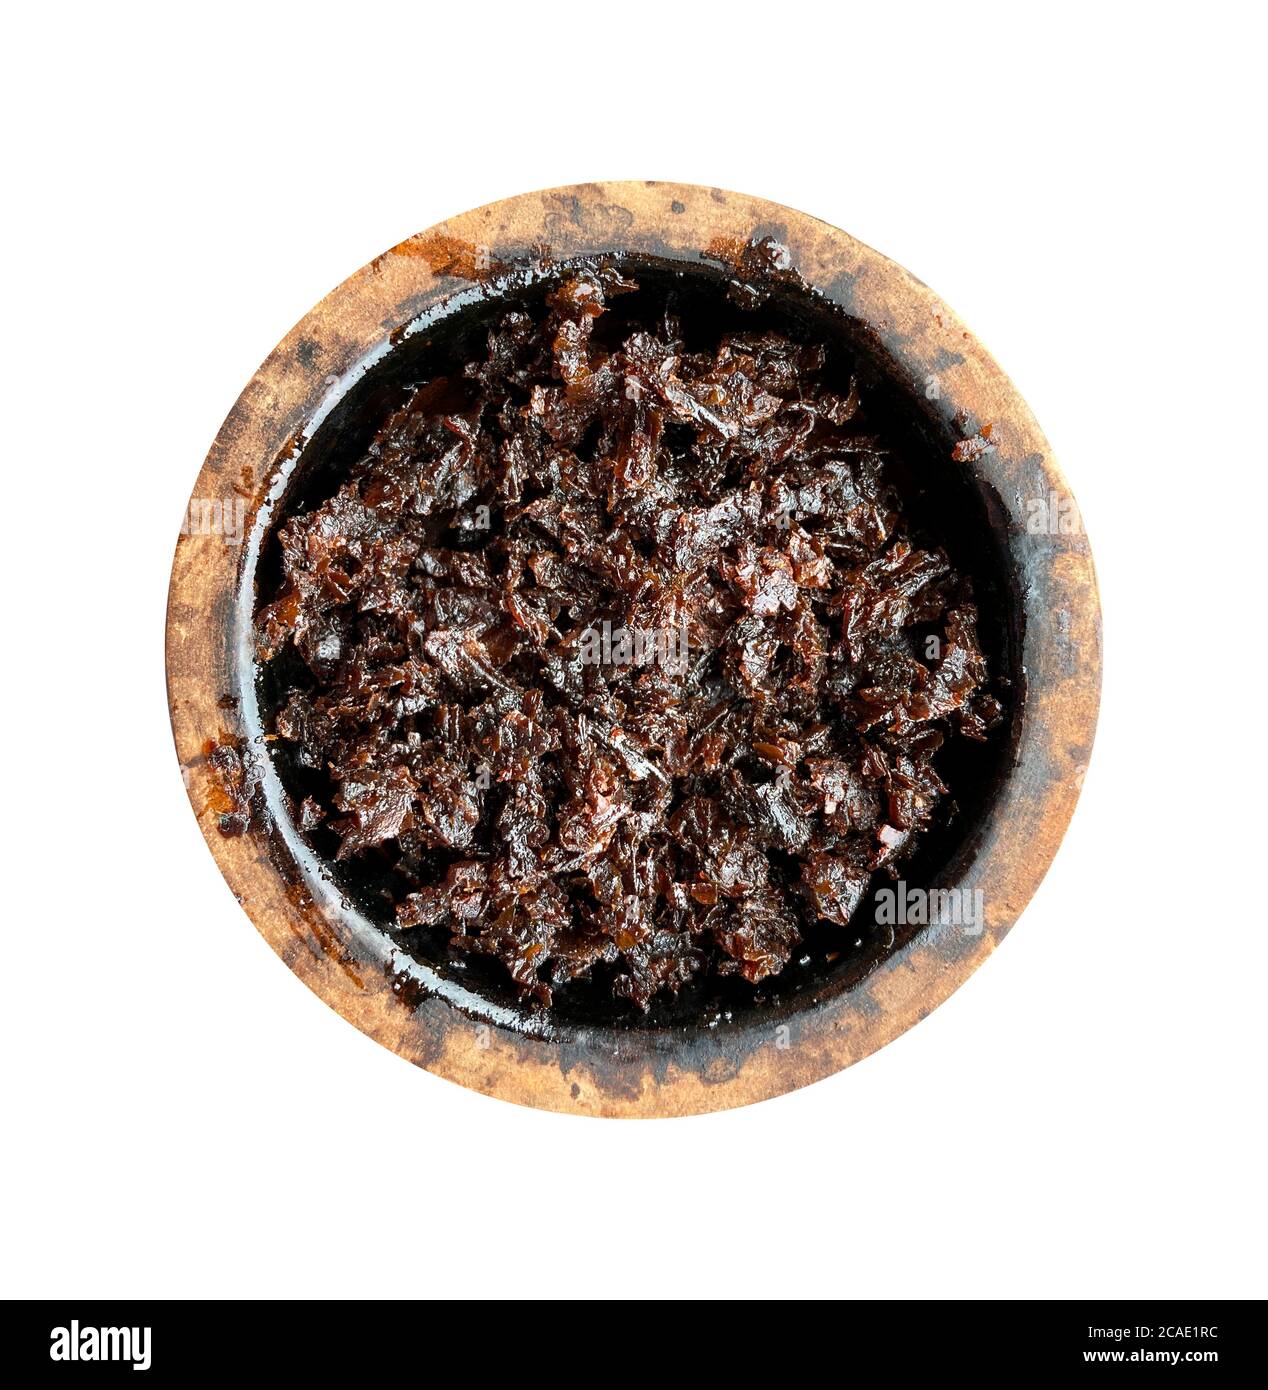 Hookah head with tobacco inside and coals on the pure white background  Stock Photo - Alamy